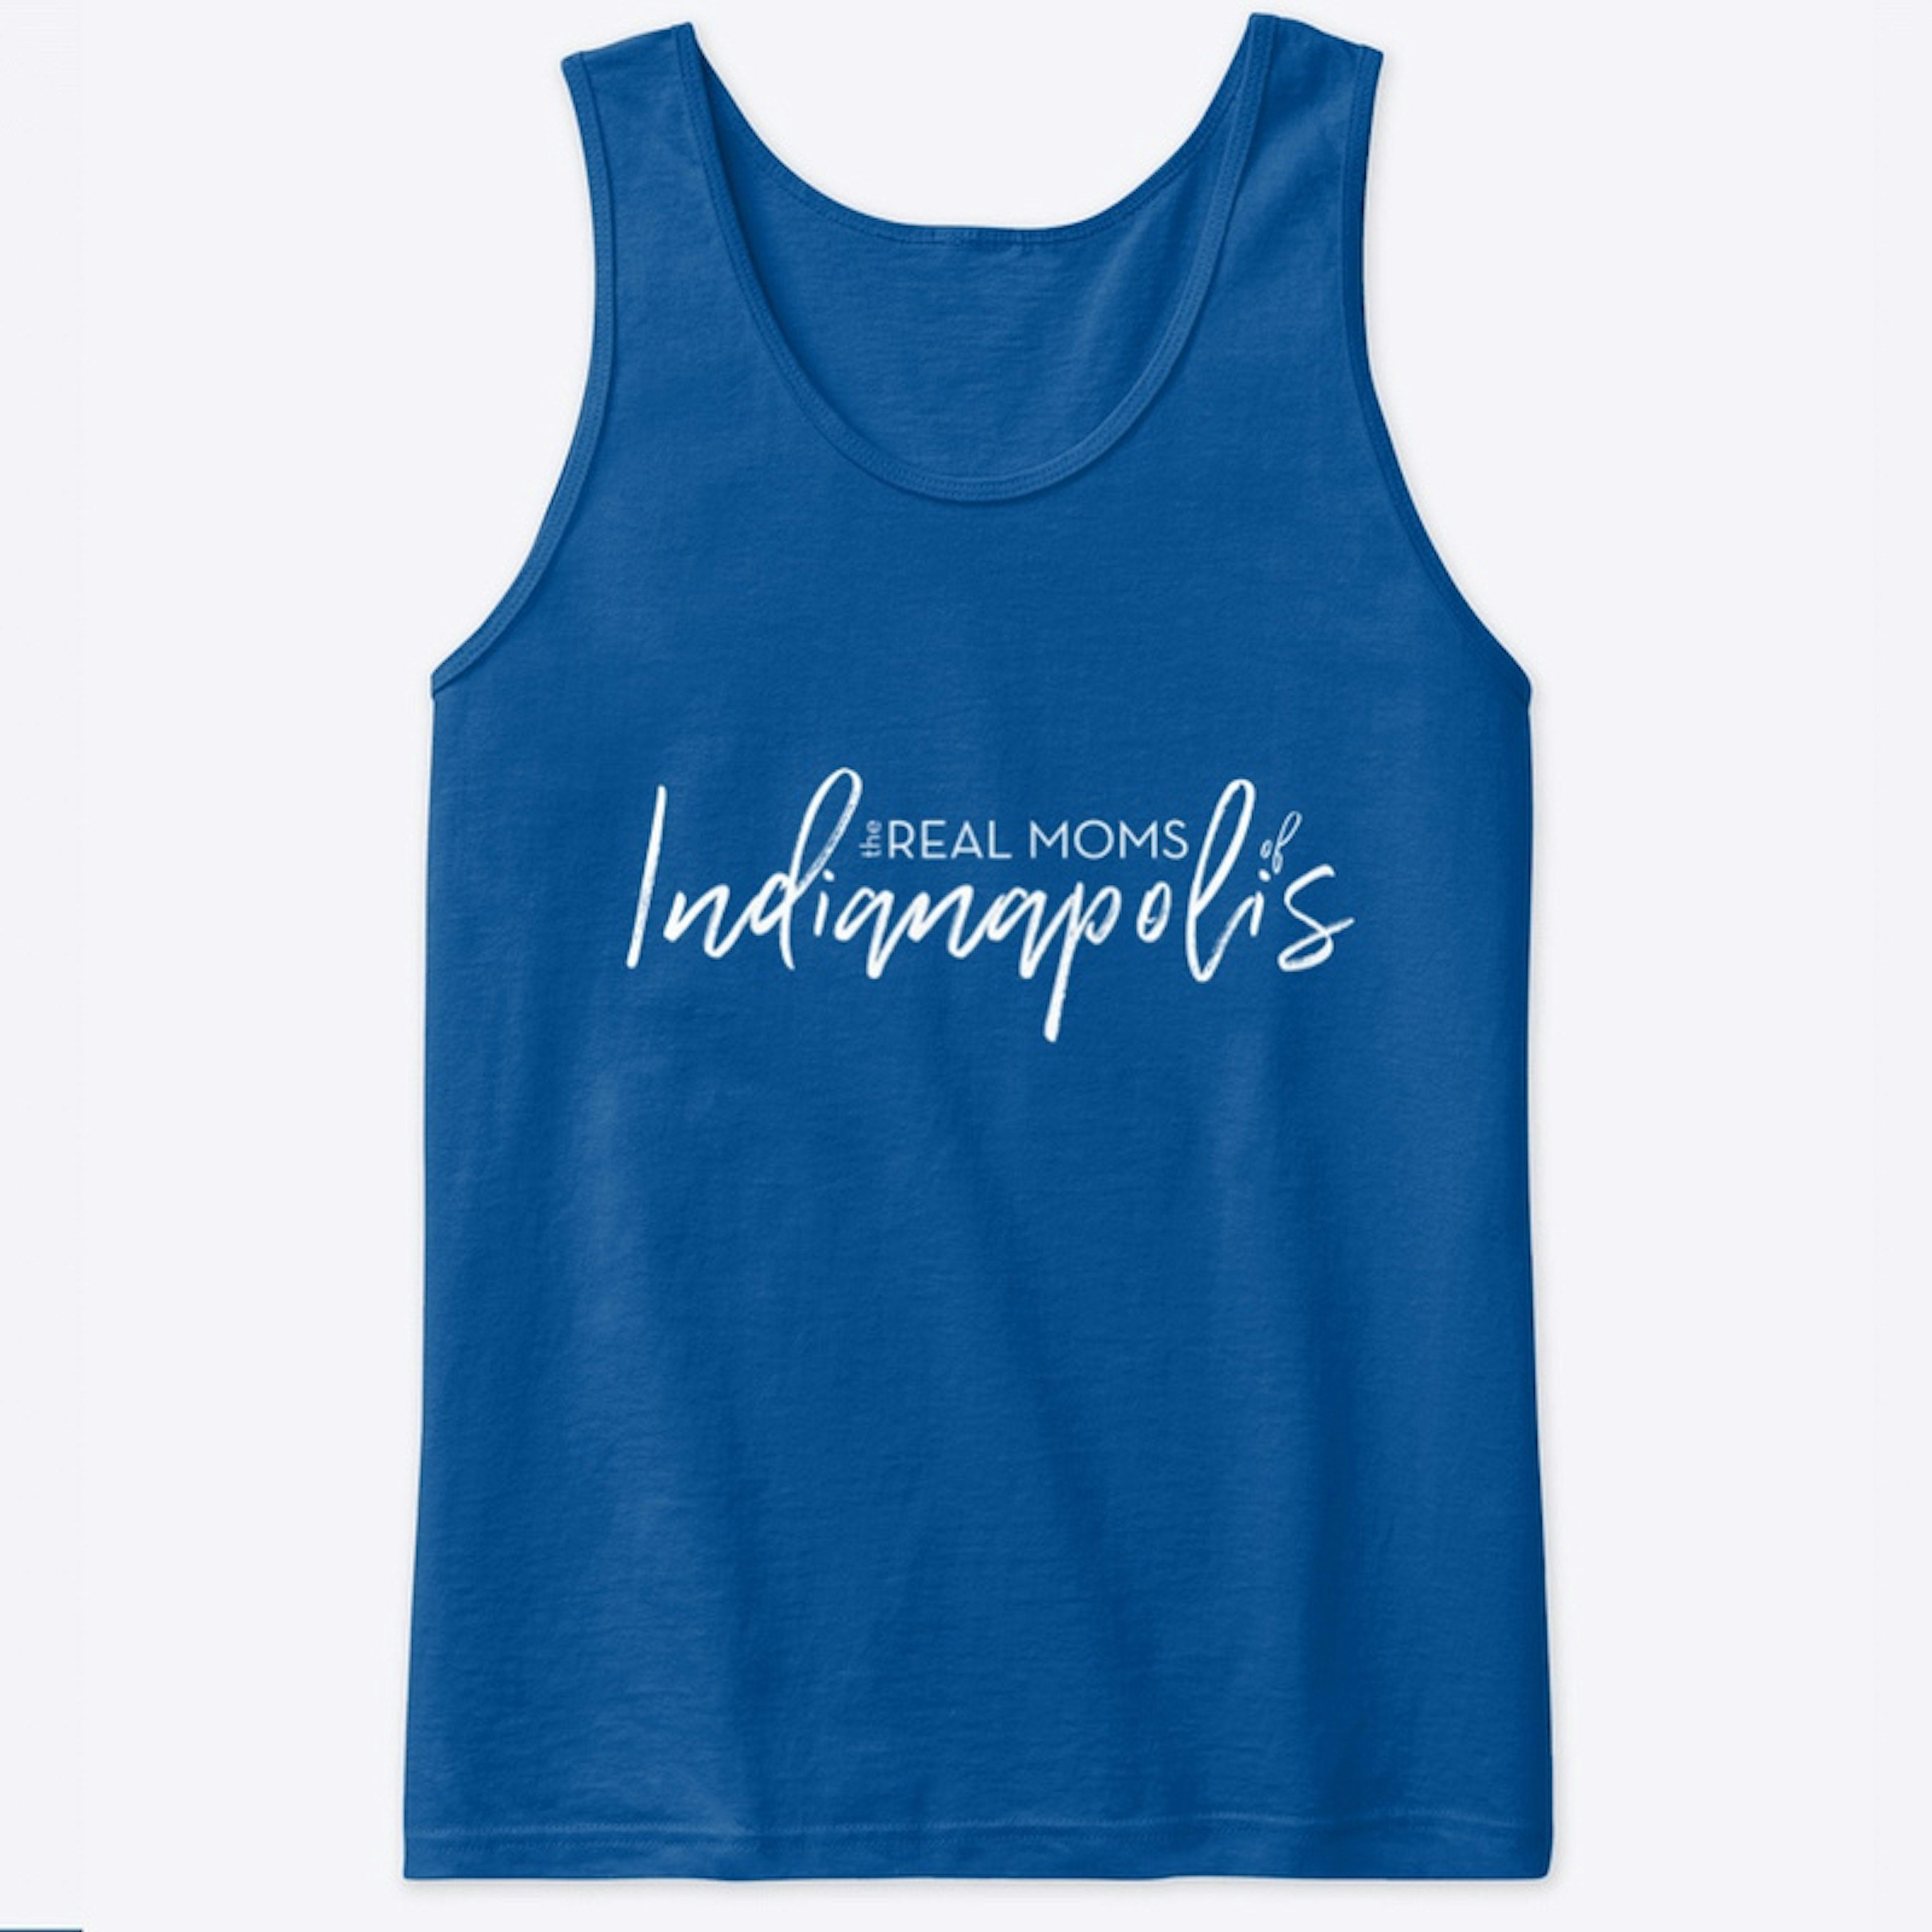 Real Moms of Indy Tank Top